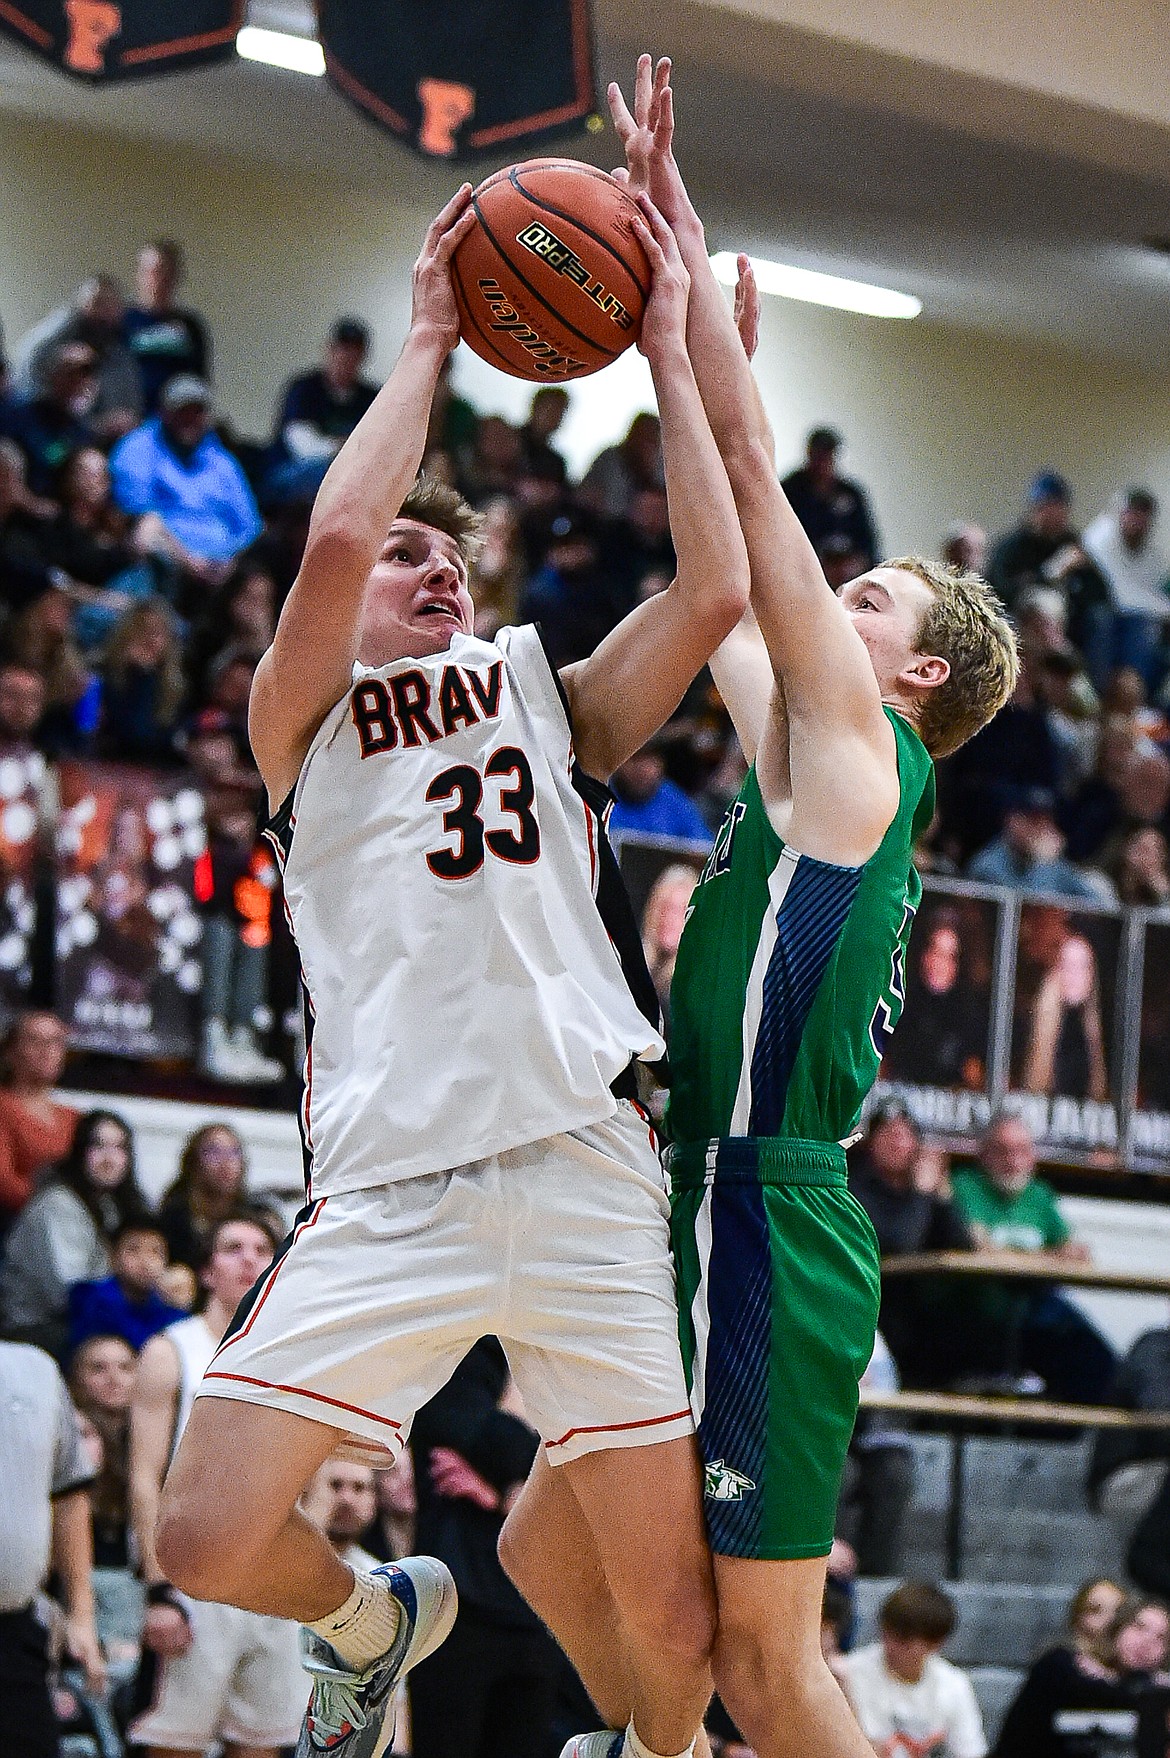 Flathead's Korbin Eaton (33) drives to the basket guarded by Glacier's Easton Kauffman (5) in the second half at Flathead High School on Friday, Jan. 19. (Casey Kreider/Daily Inter Lake)